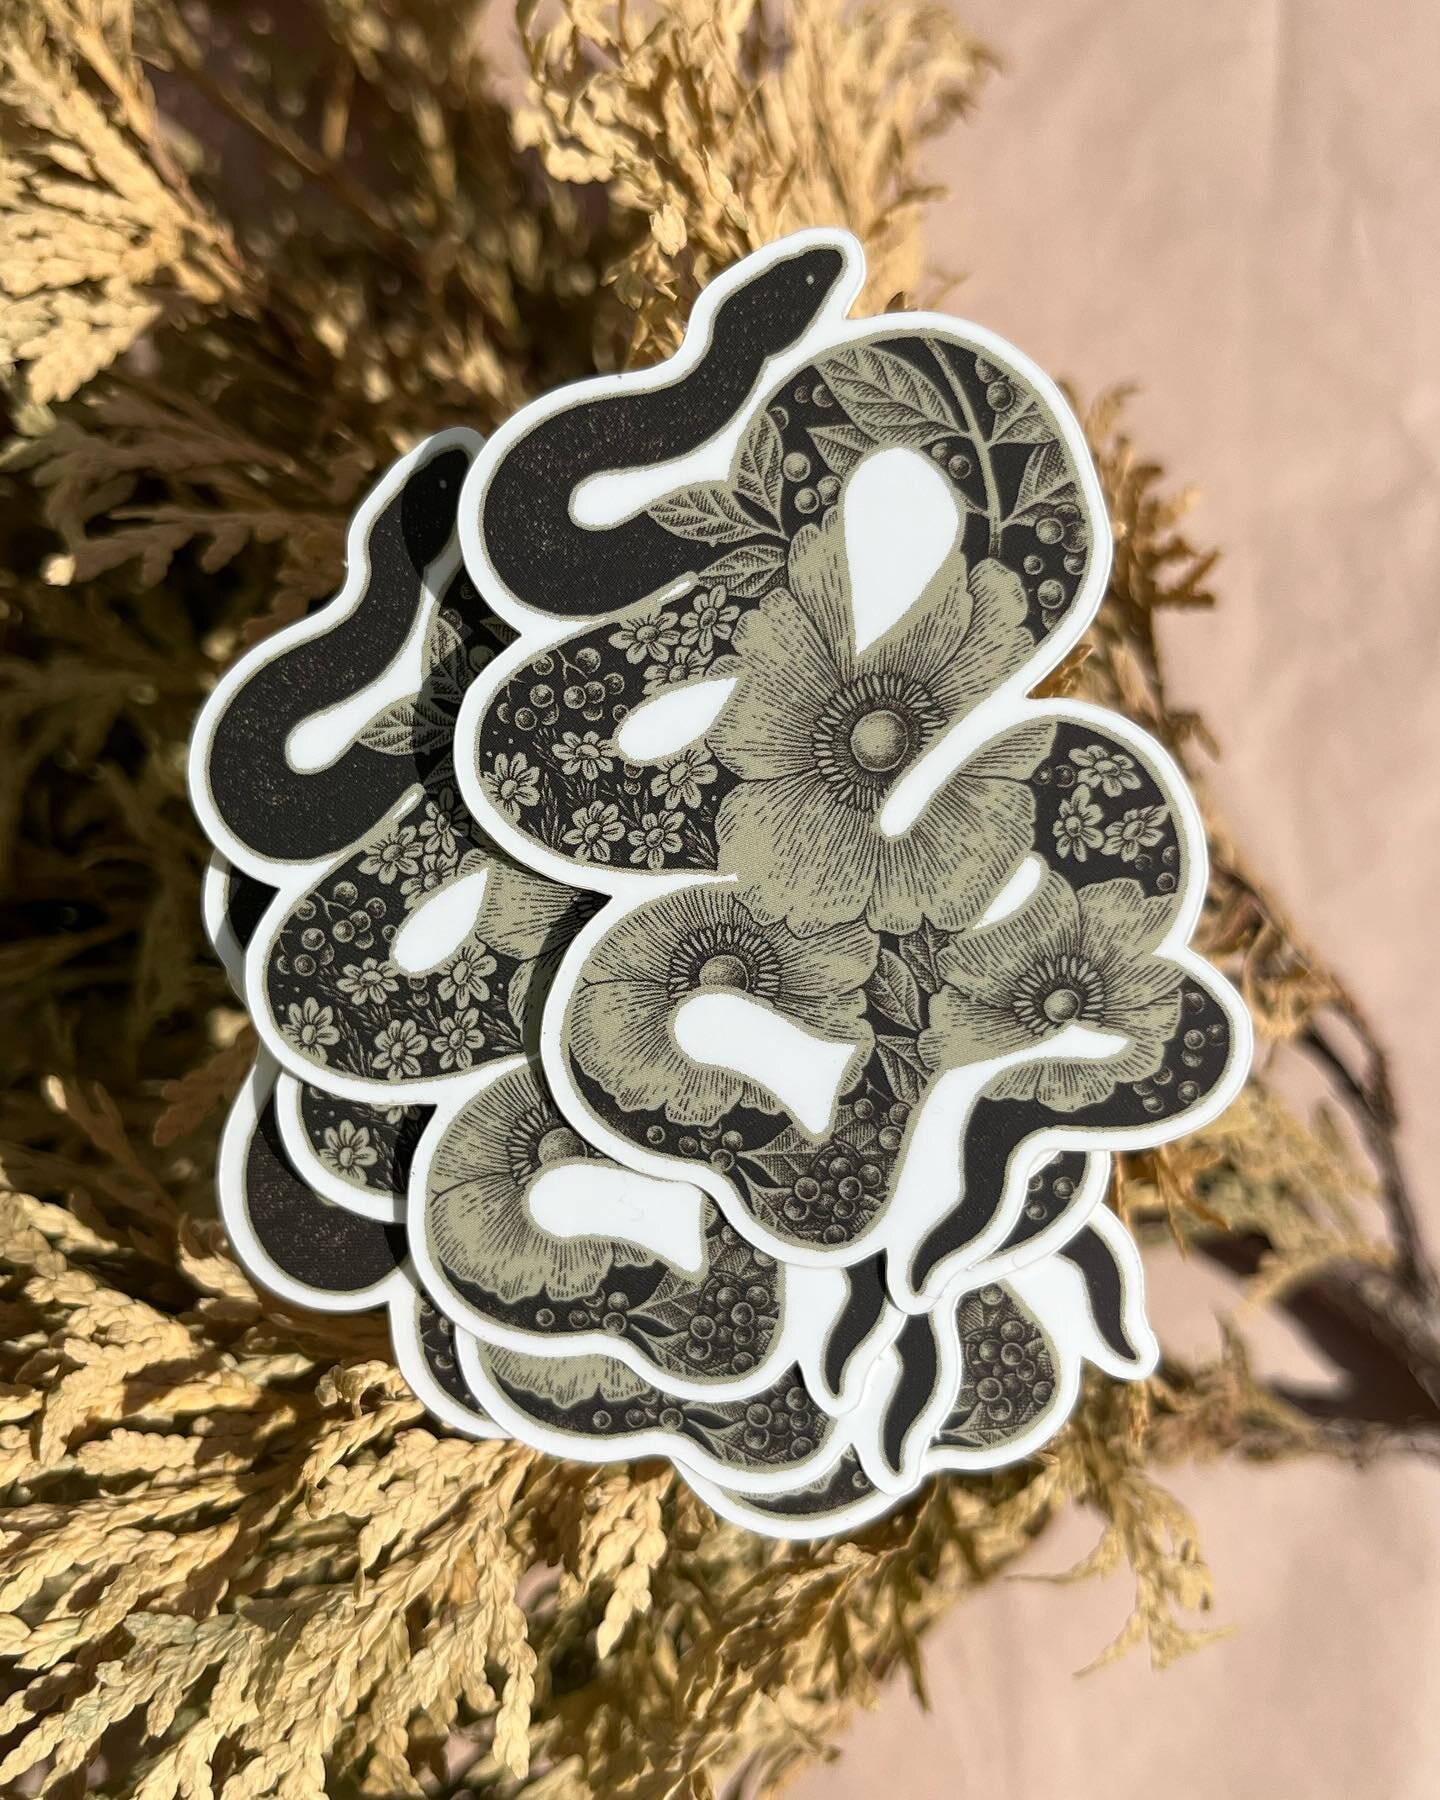 Snake bouquet stickers back in stock in the sh/op ✶ a mix of soft and hard, comfort and fear, symbols for our internal landscape ✶

#botanicalillustration #stickercollection #snakedrawing #blackwork #dotwork